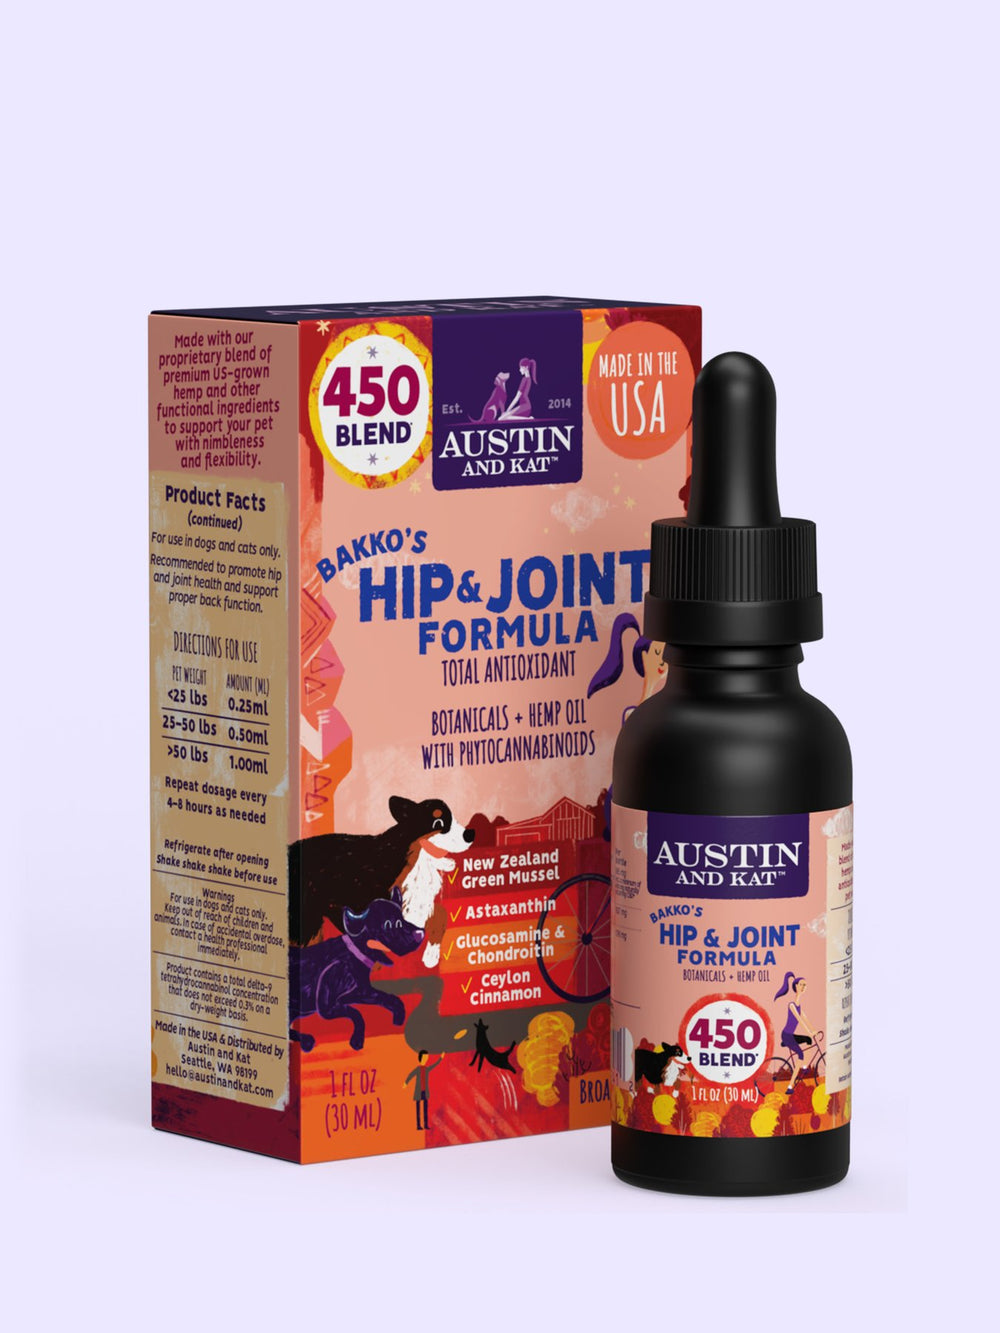 Bakko's Hip and Joint Oil